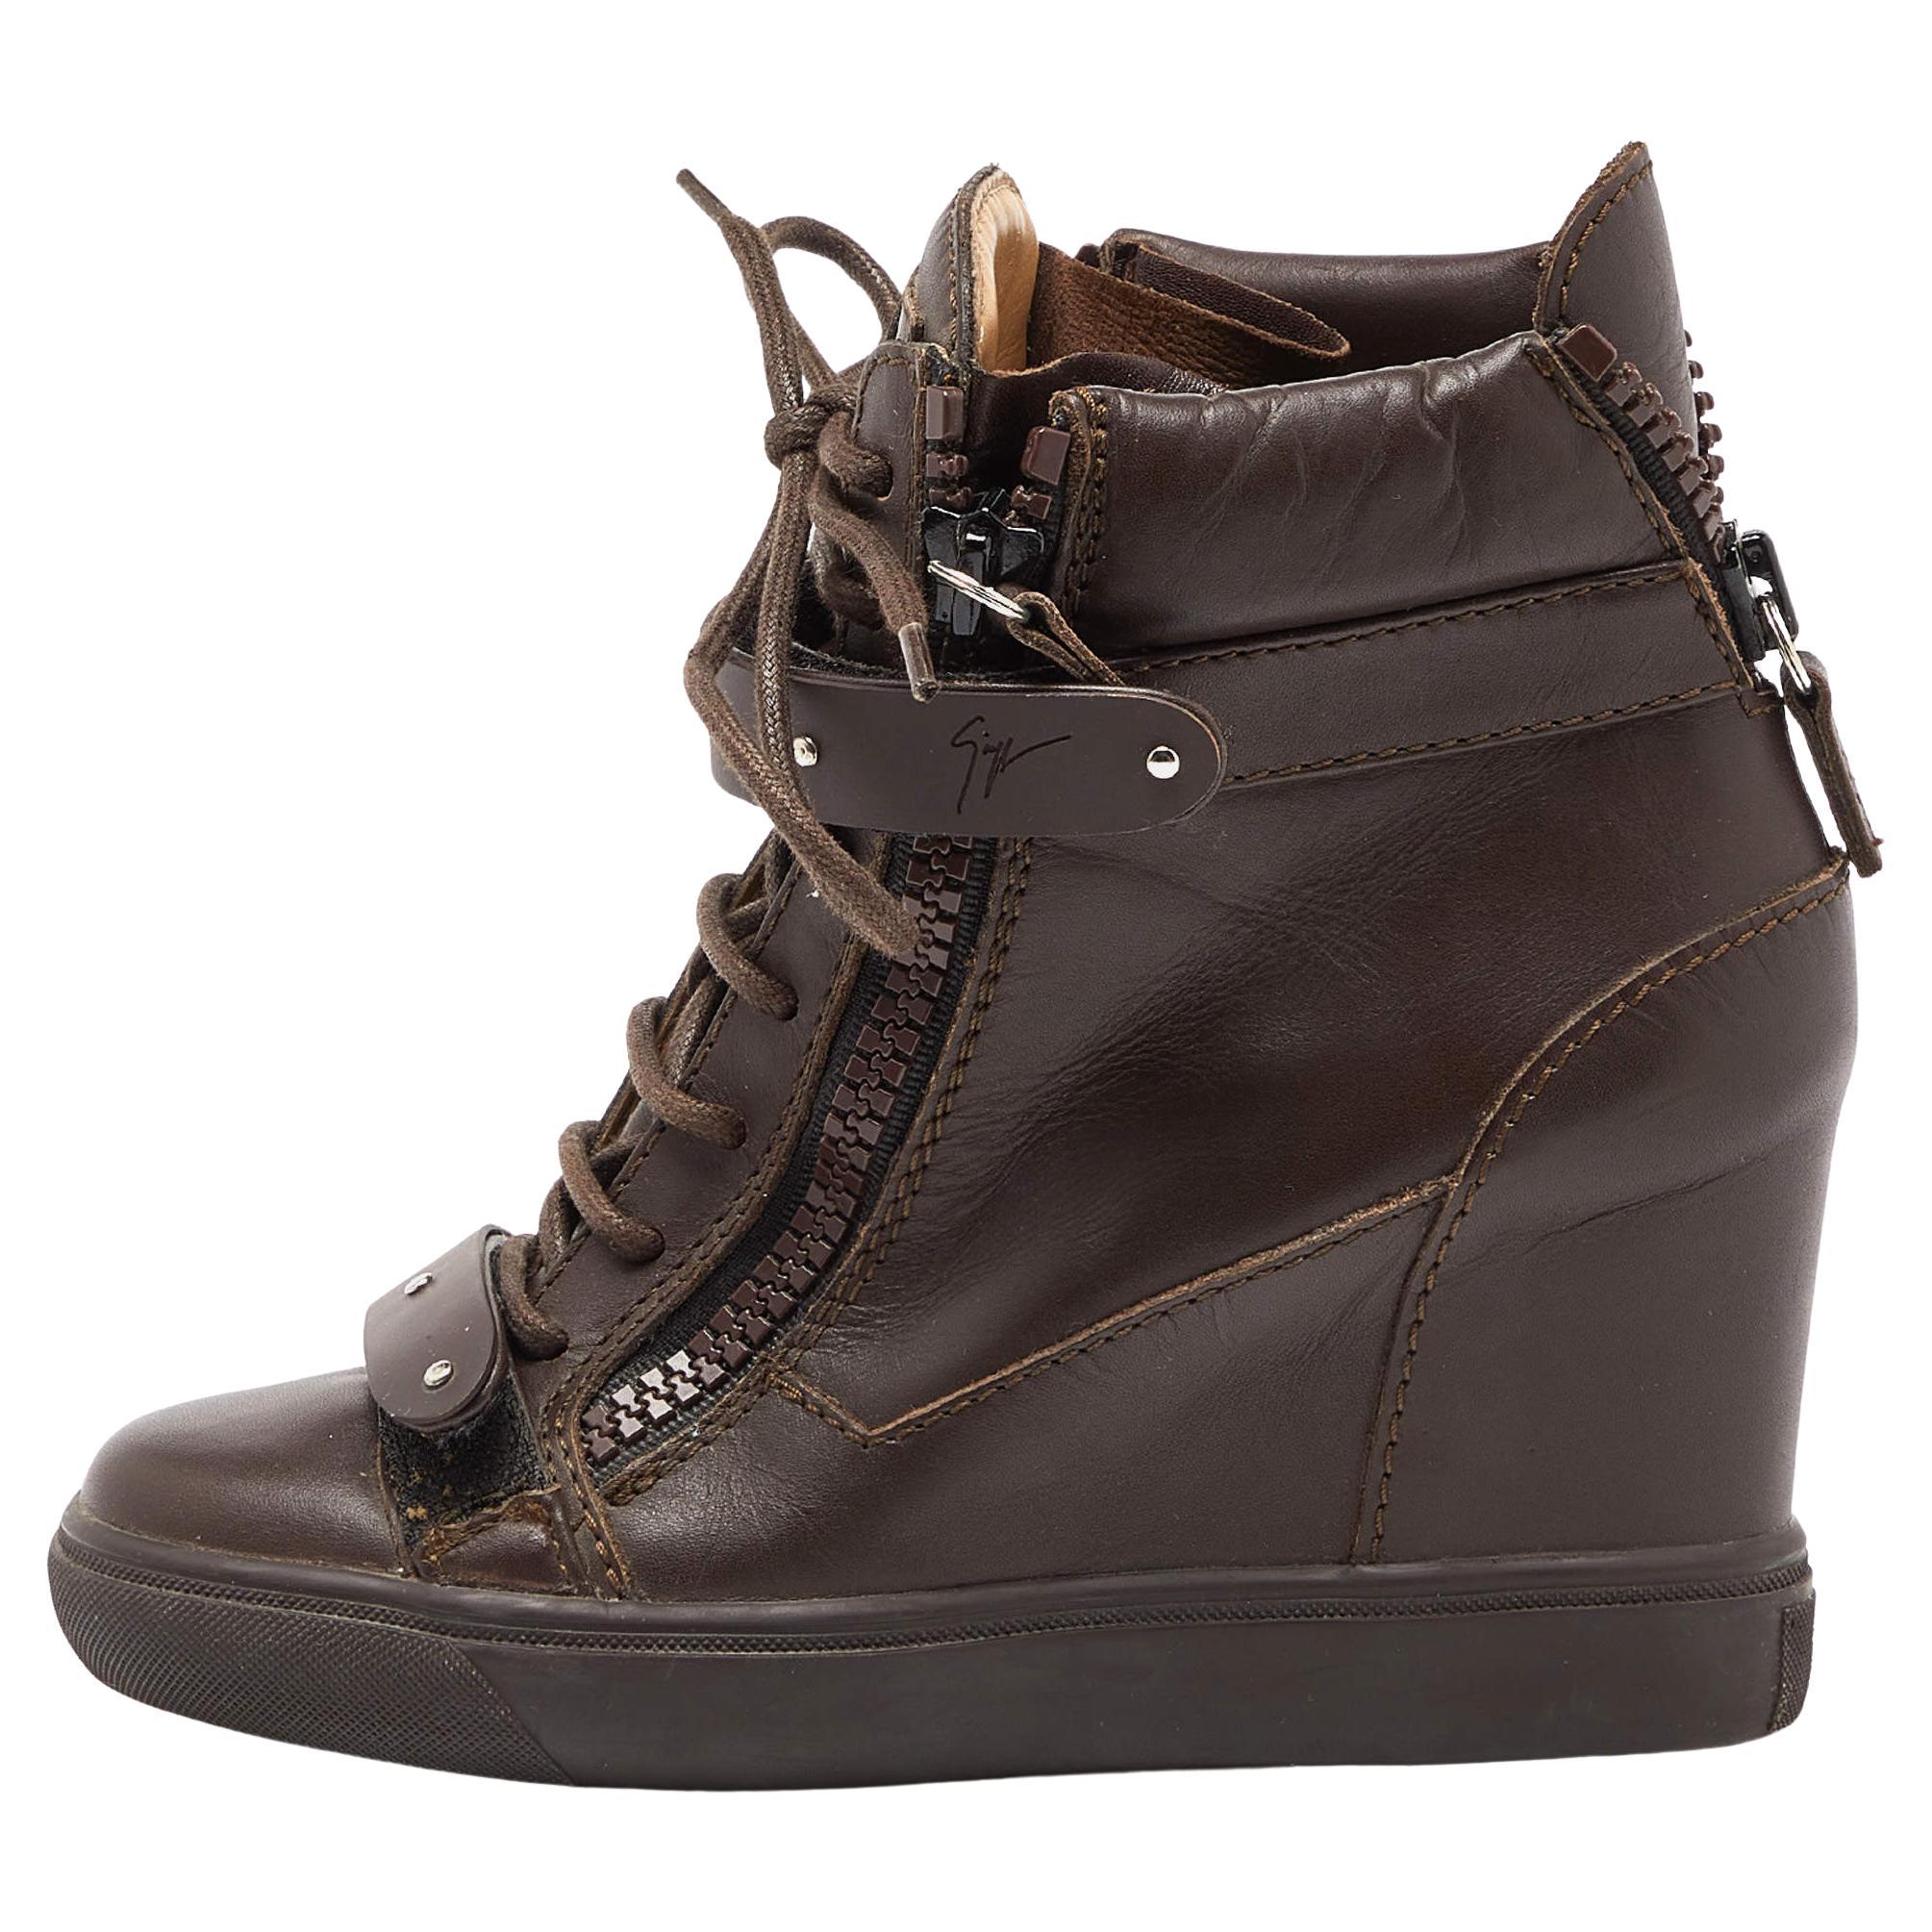 Giuseppe Zanotti Brown Leather Coby Wedge Sneakers Size 36 For Sale